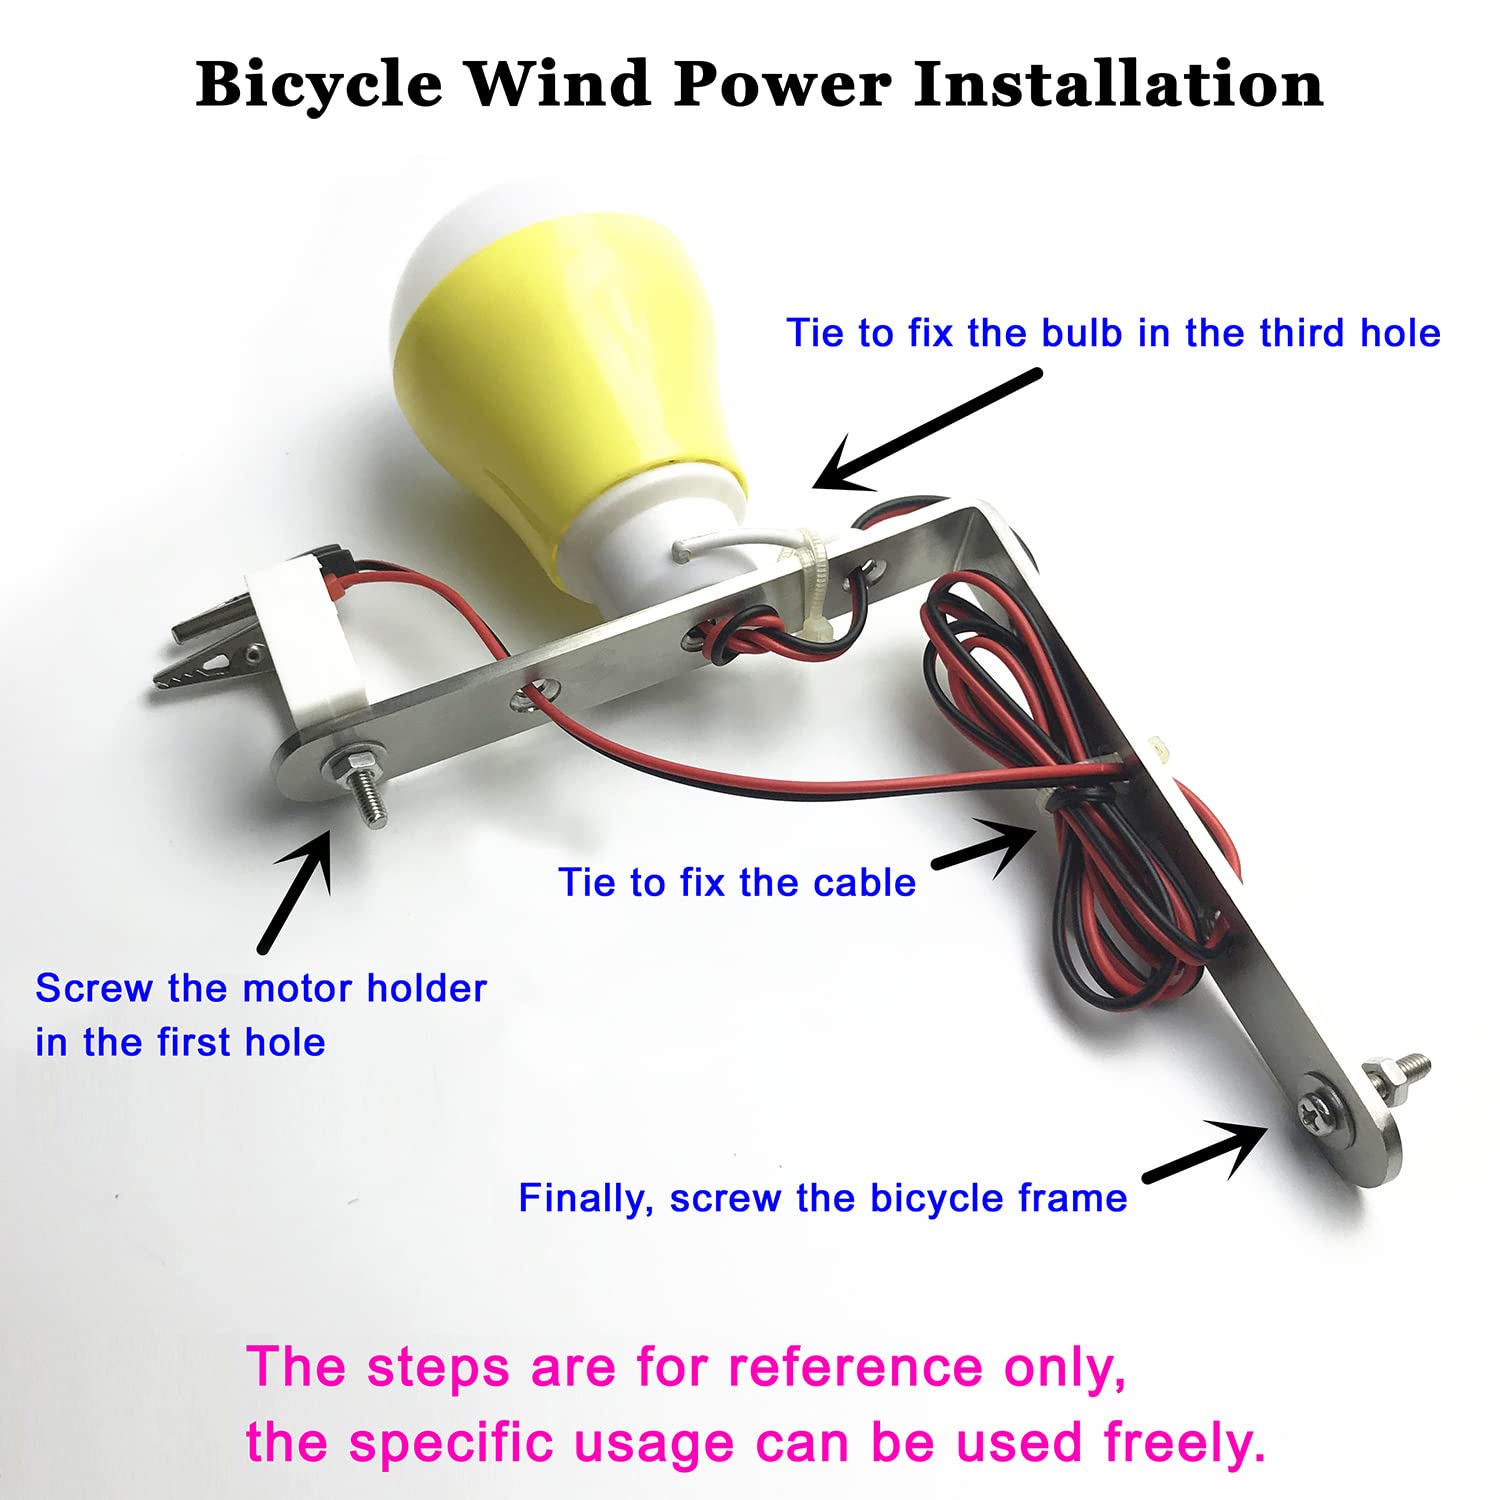 Small Wind Turbine Generator Micro DC Motor Power Wind Turbines Electricity Fan Blades Model Bicycle LED Light DIY Kits for Teaching Physical Power Generation Science Experiment